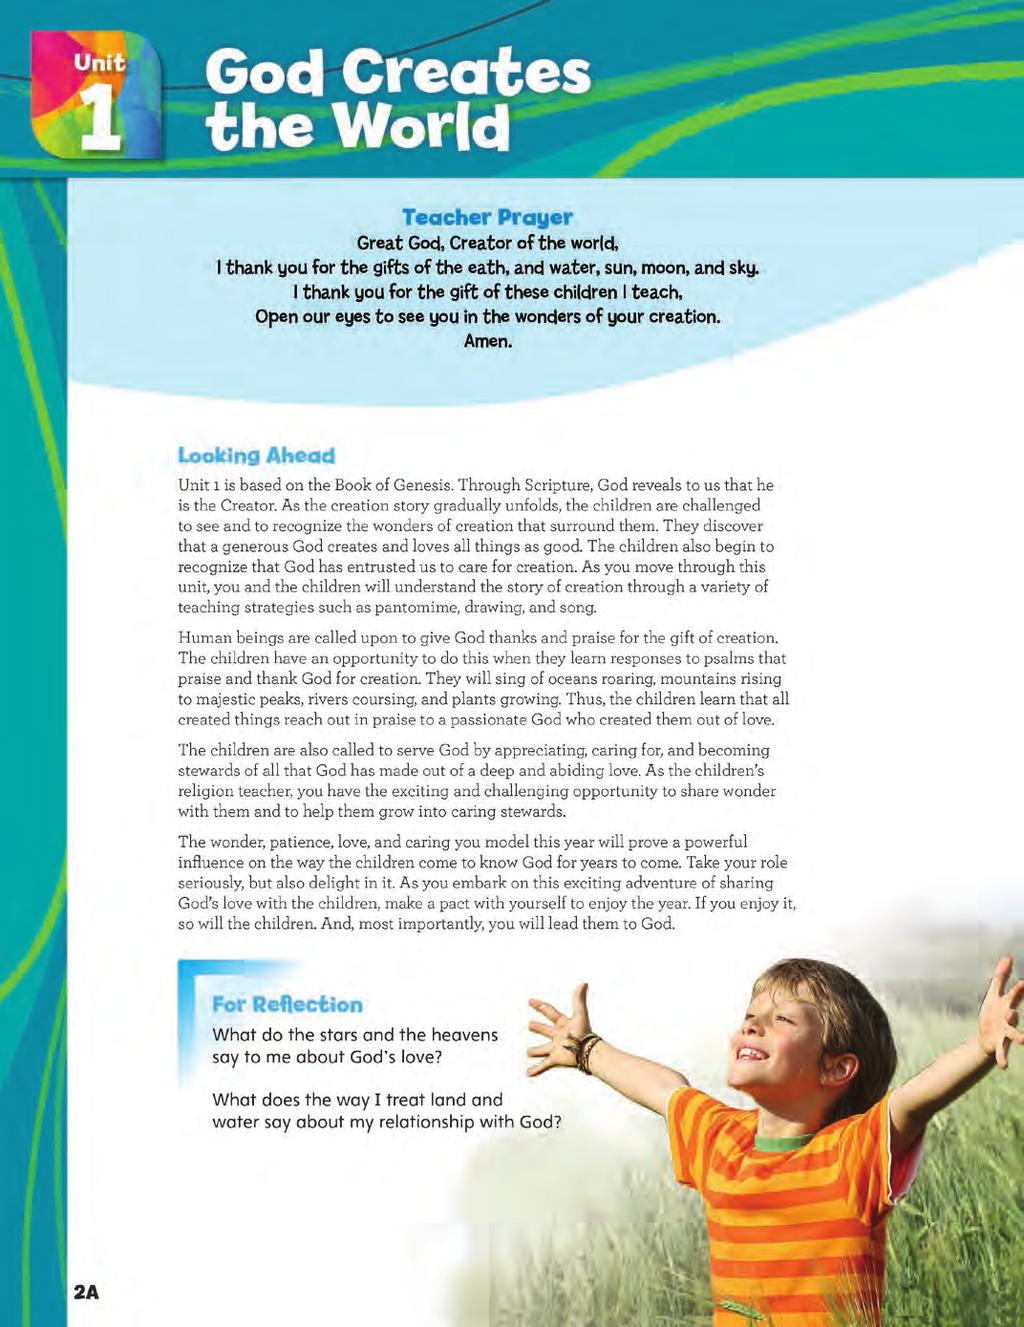 Kindergarten Teacher Guide Unit Opener UNIT OPENER On the opening page of each unit, the Looking Ahead feature provides inspirational background information